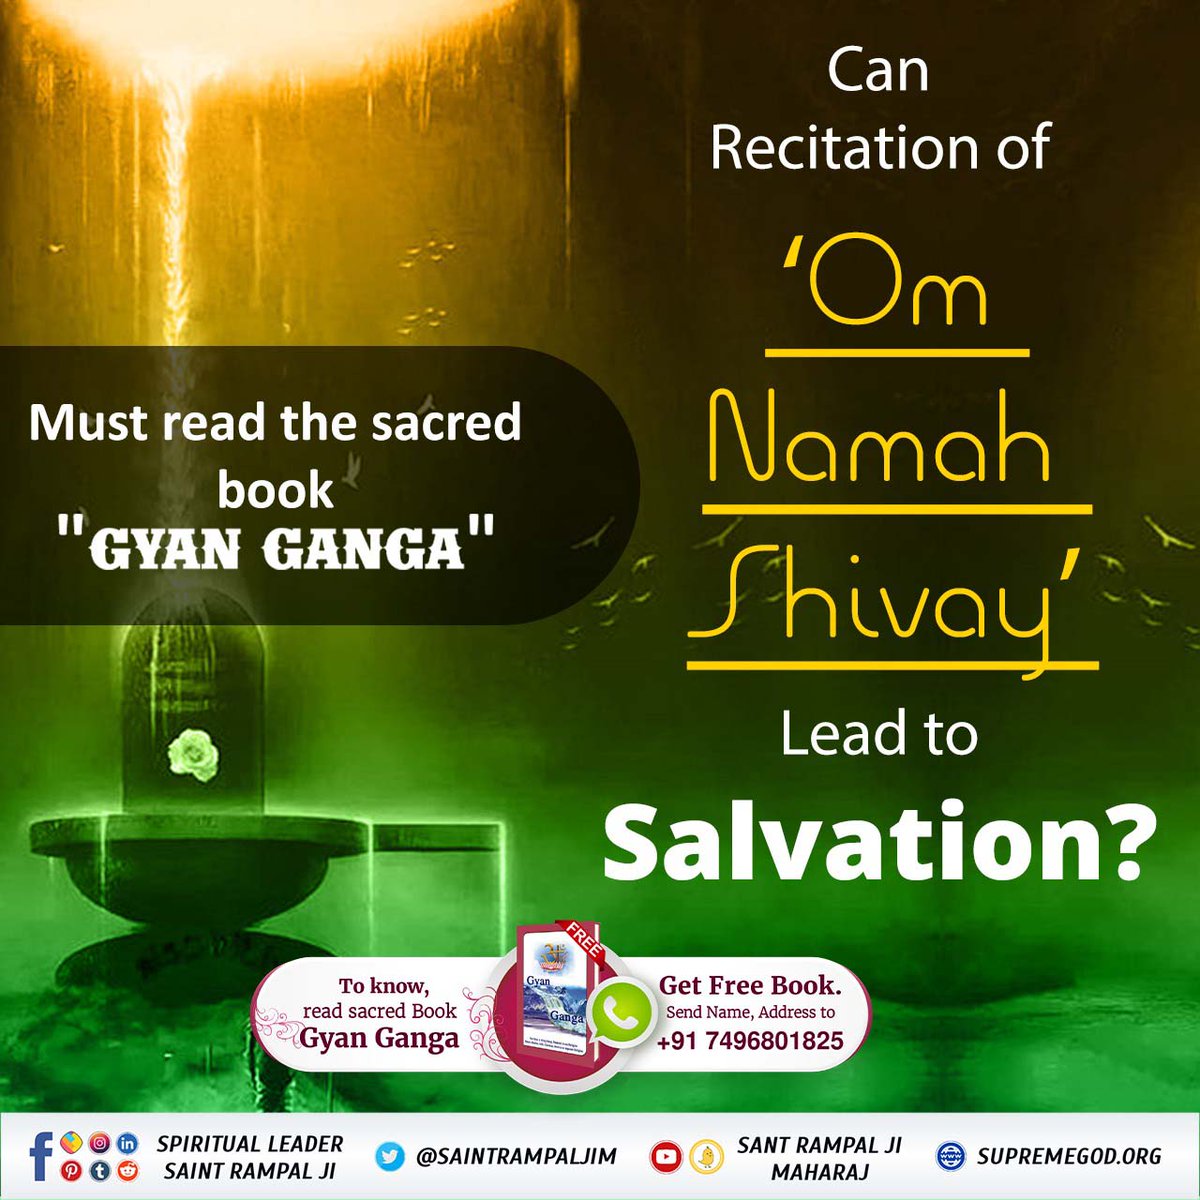 #GodMorningSunday

Om namah shivay is not the true mantra of shiv ji. If you want to know the mantra to get all benefits of shivji read book Gyan Ganga